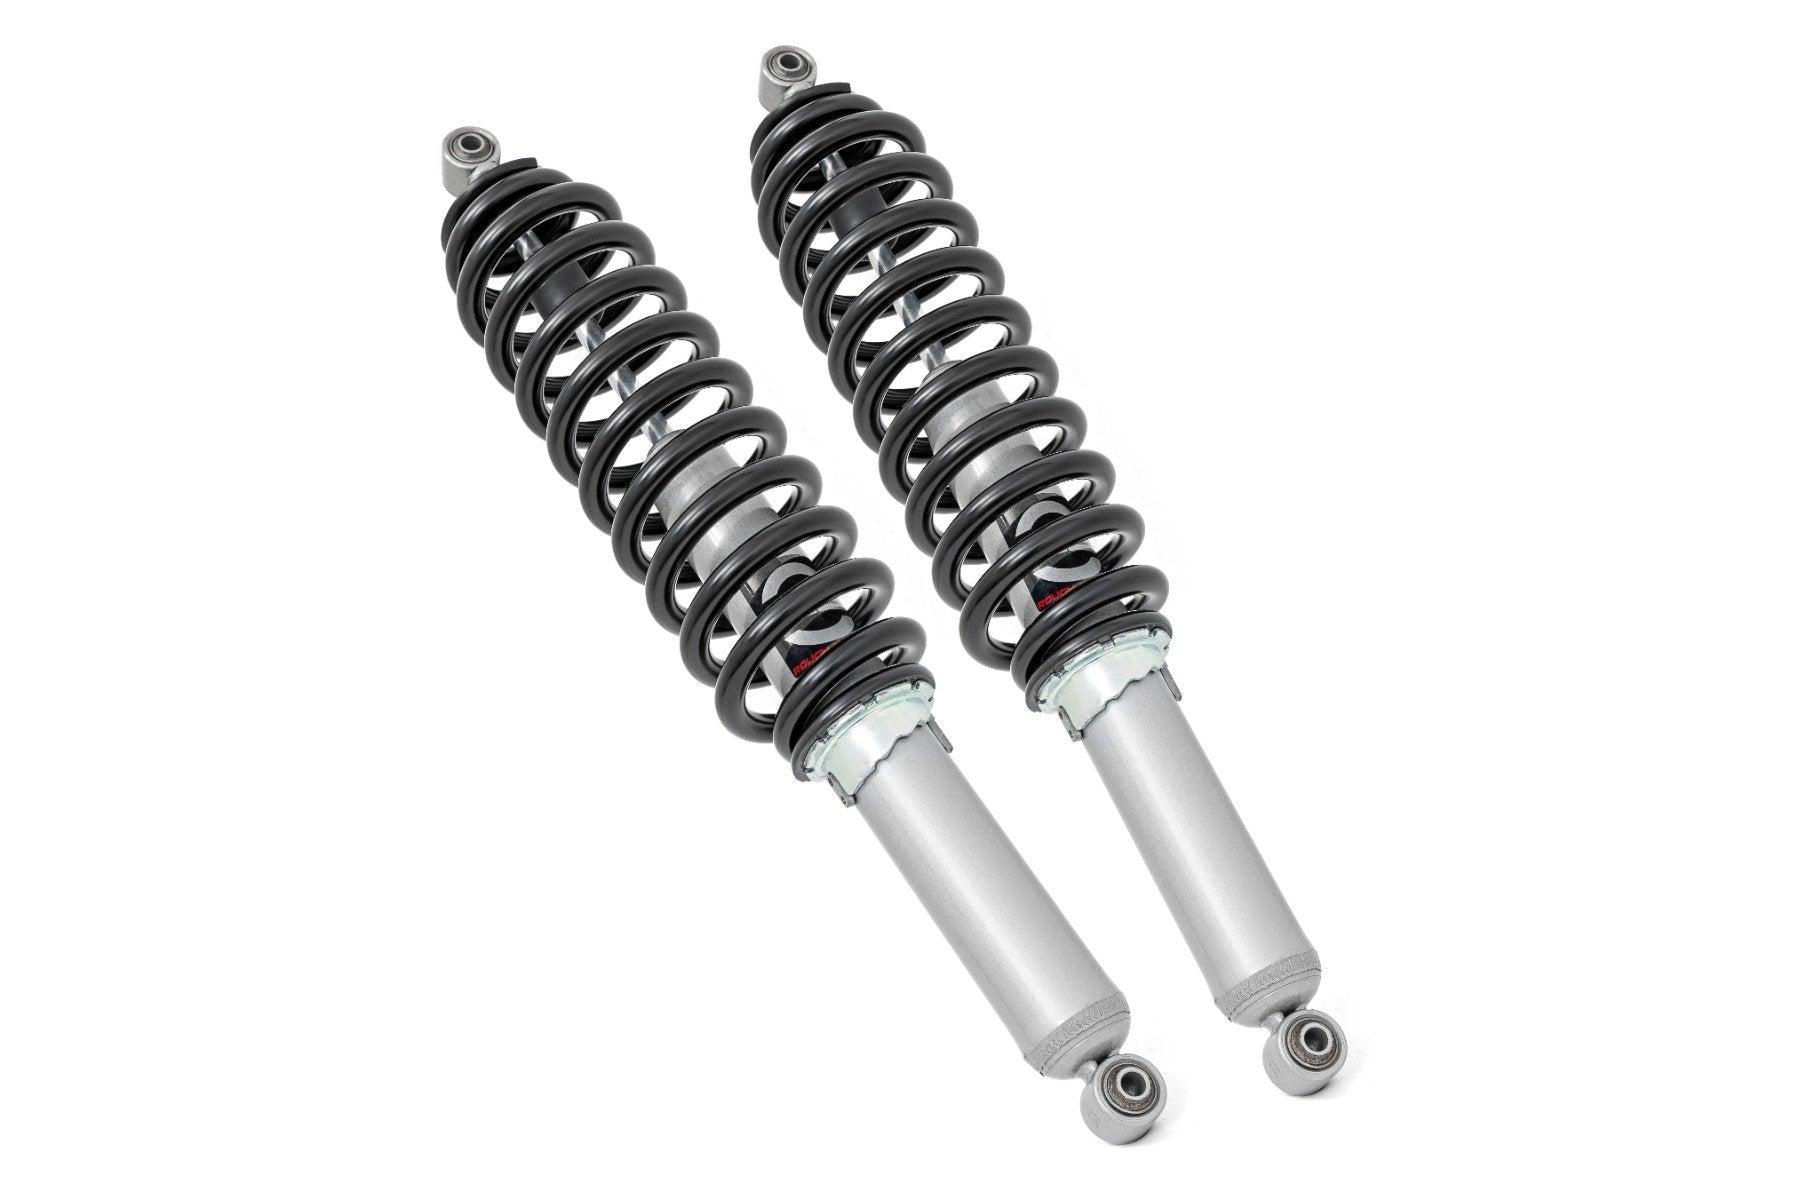 Extreme Polaris Over Ranger | Stock Performance & Offroad – Rear N3 Shocks Coil |